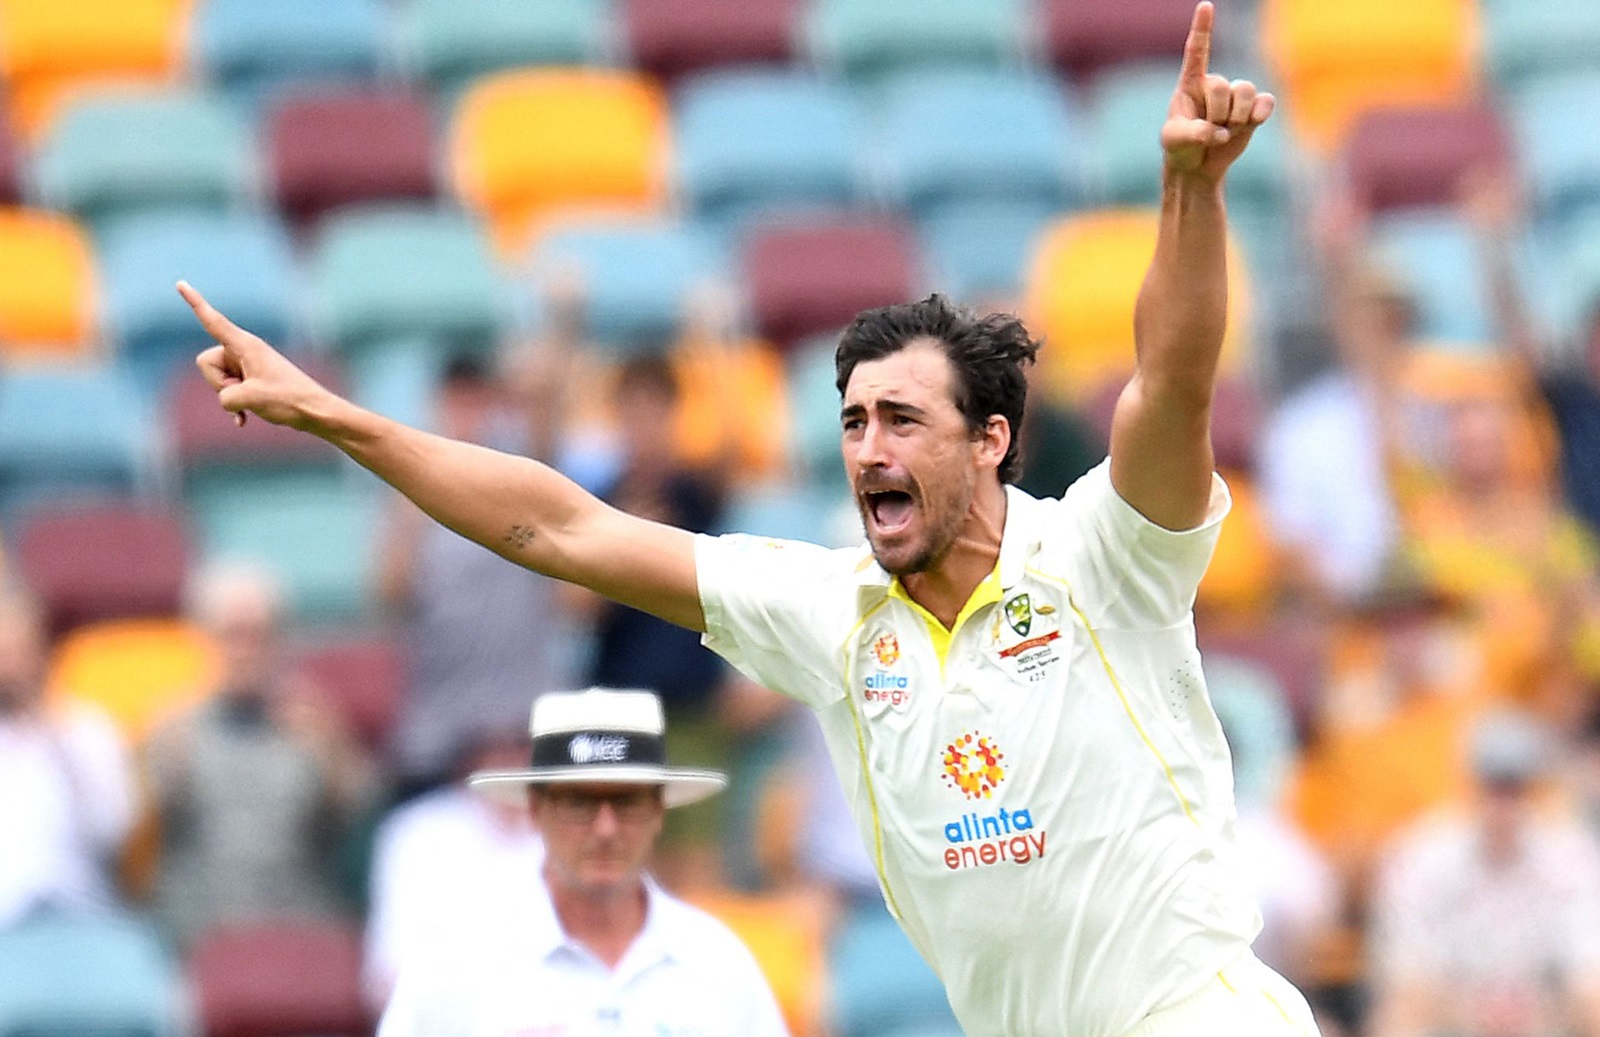 Australian Cricket Awards: IPL DROPOUT Mitchell Starc reveals, 'Thought of quitting cricket completely'